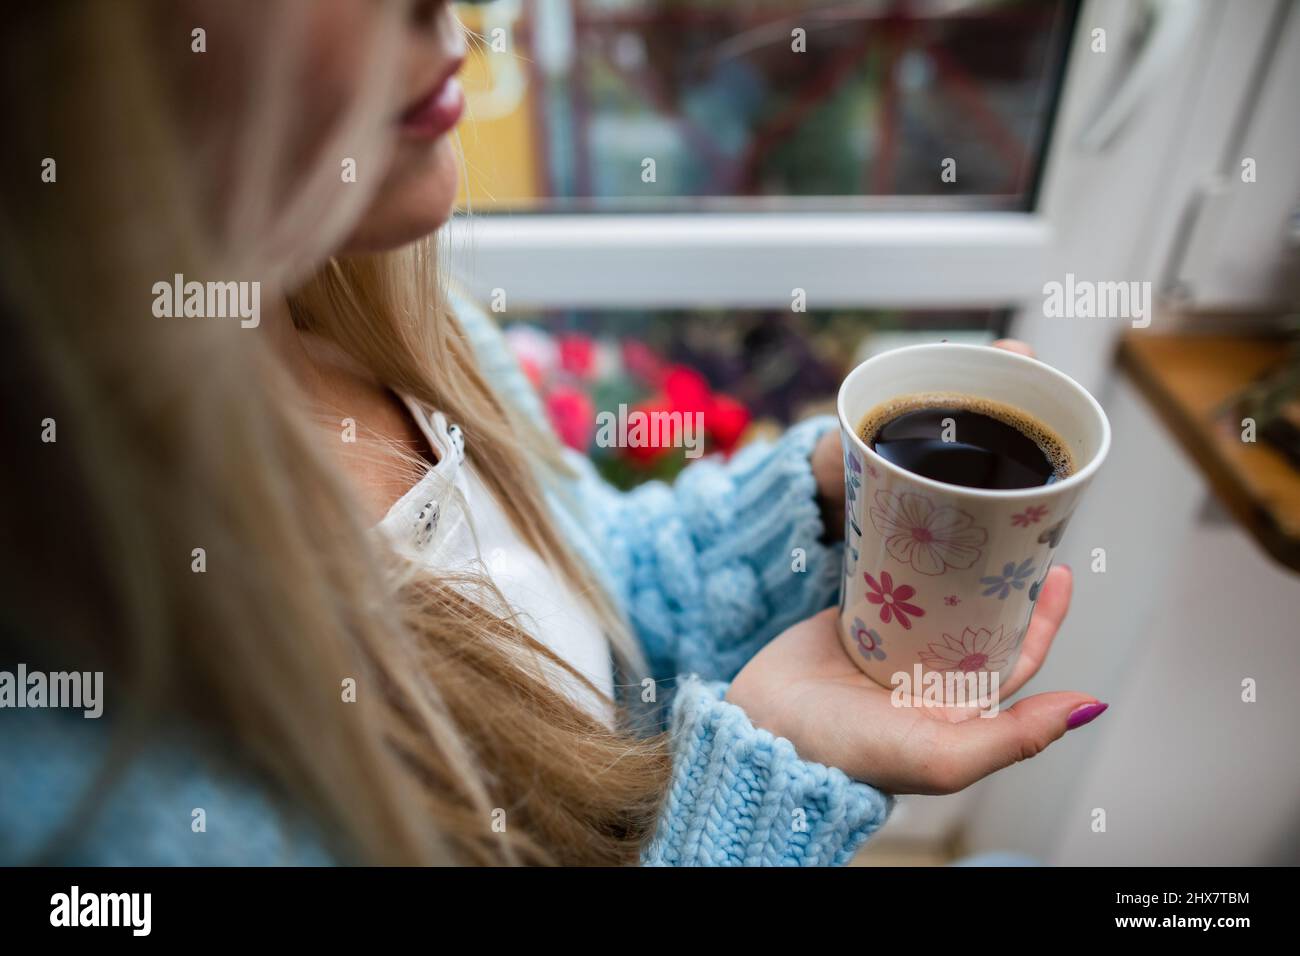 A woman sits at home holding a mug of hot coffee in her hands. Stock Photo